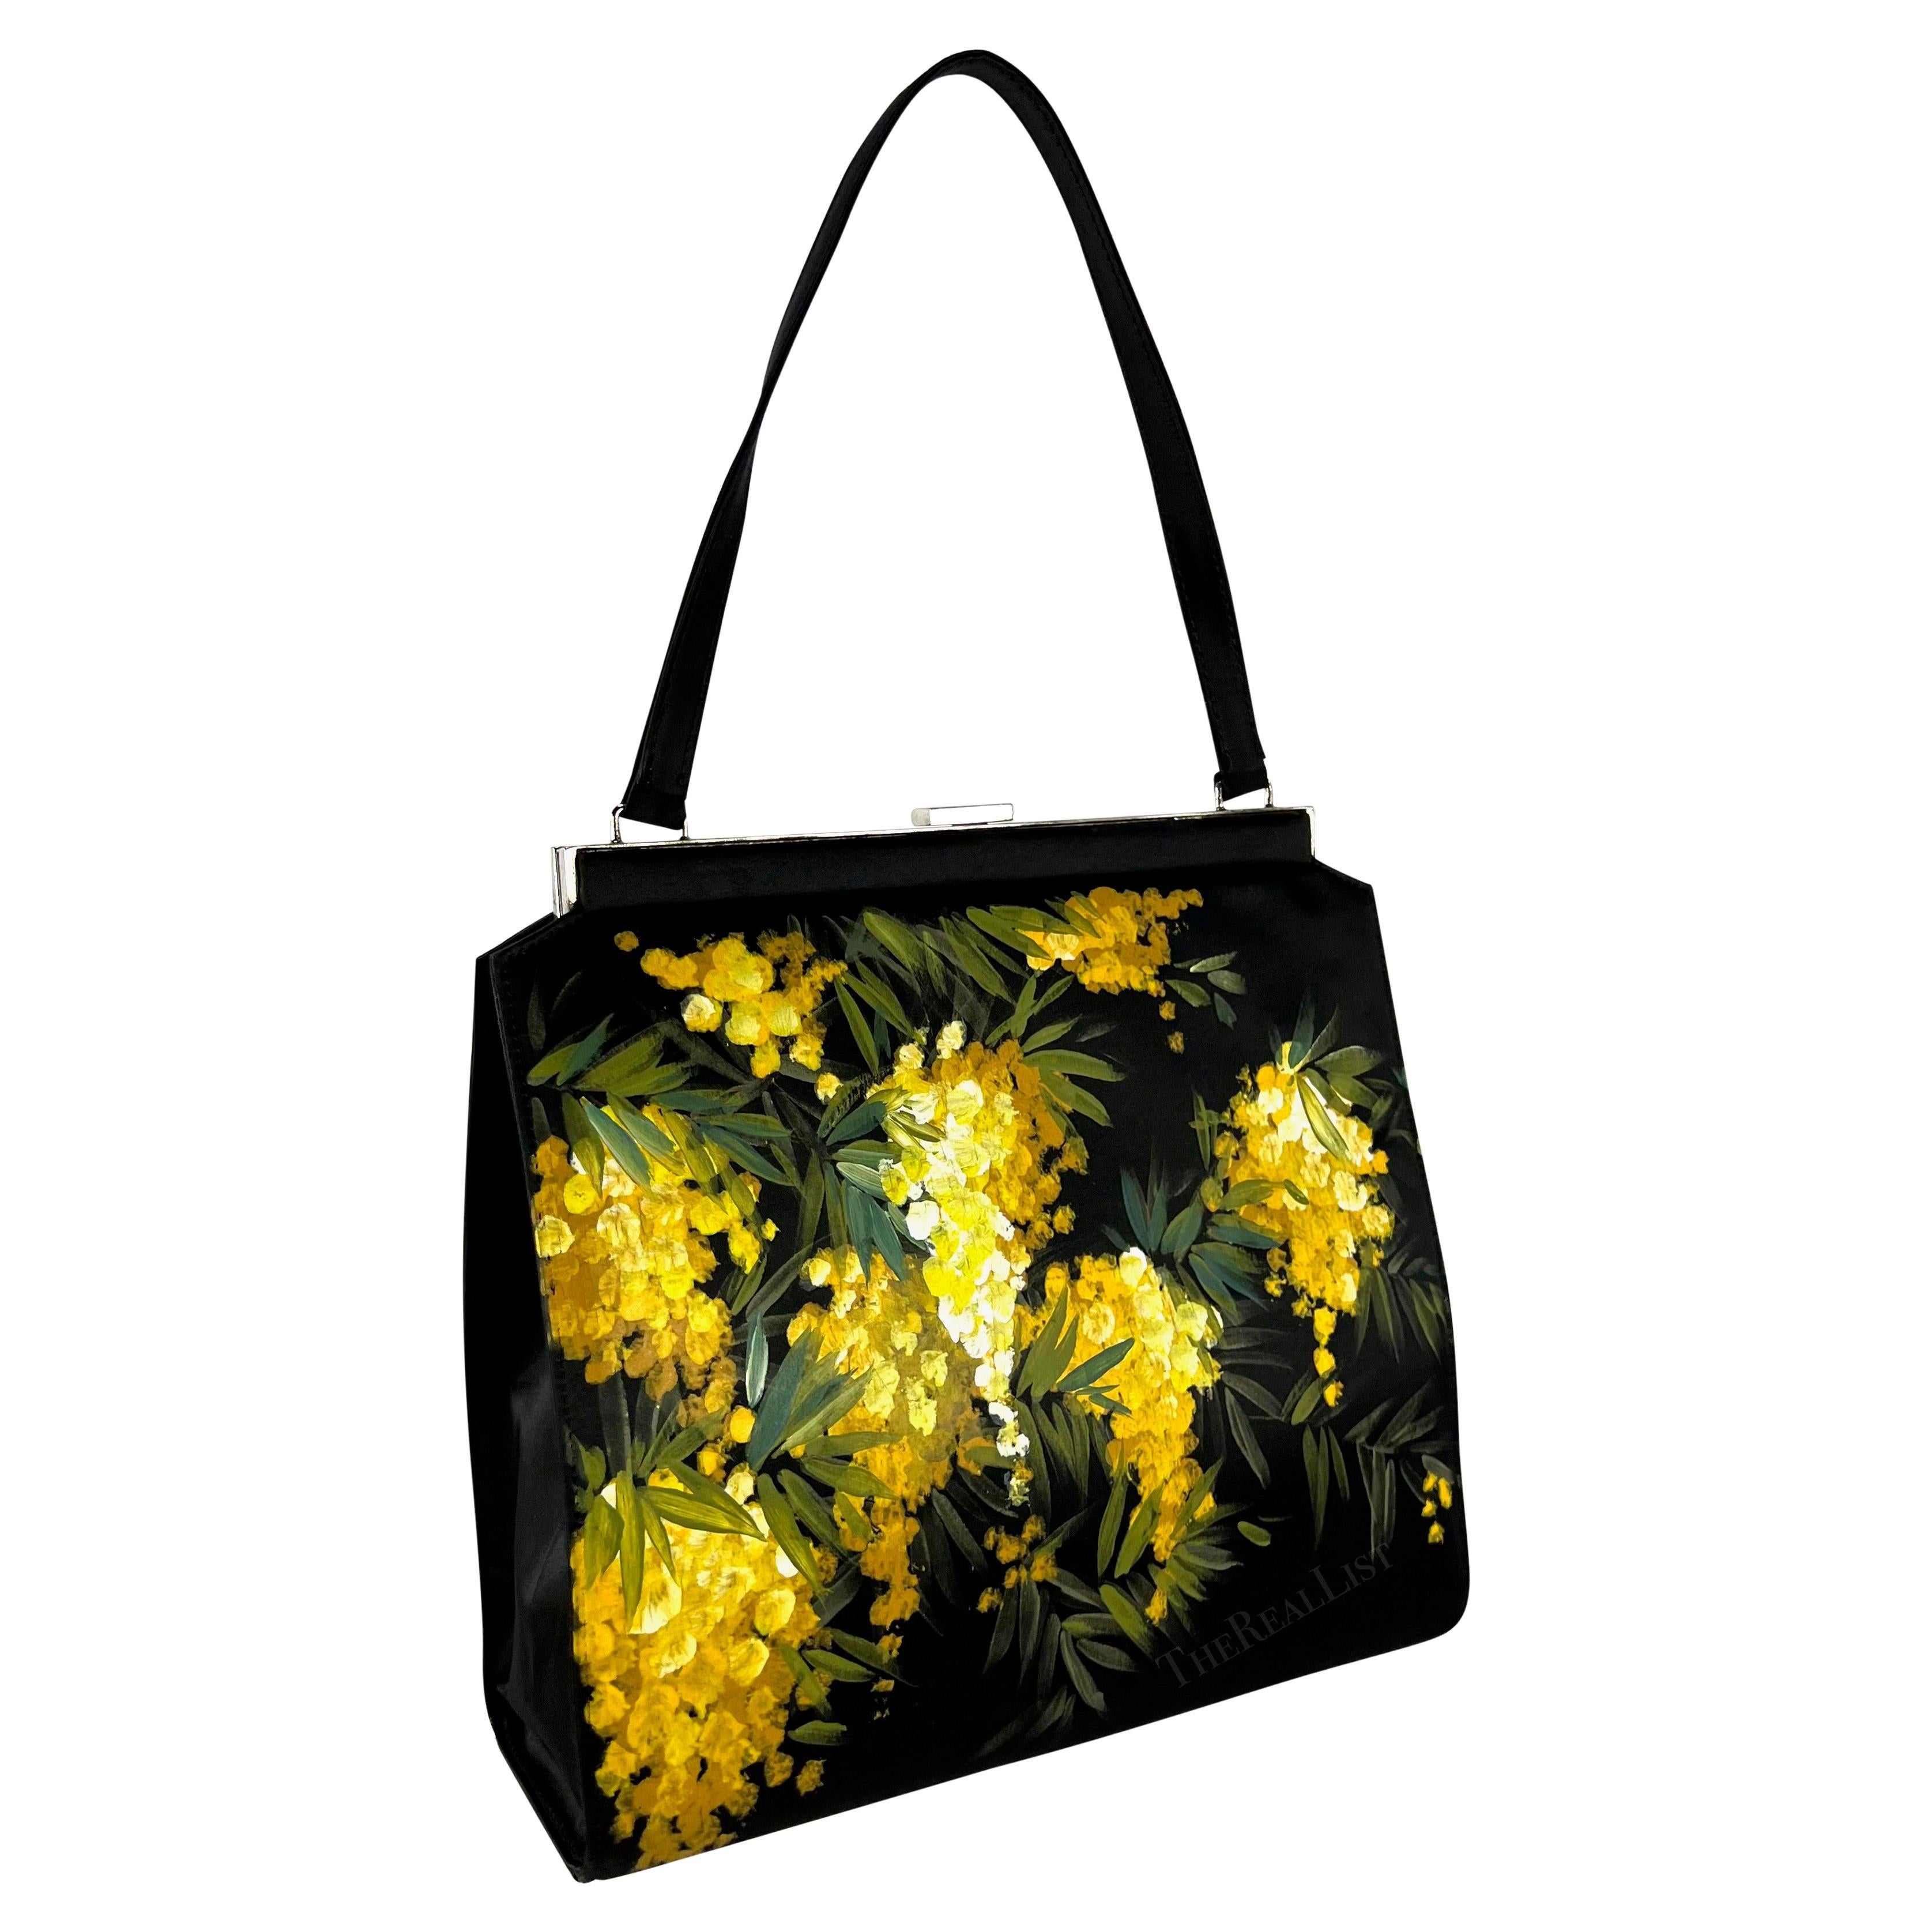 F/W 1998 Dolce & Gabbana Black Satin Hand-Painted Yellow Floral Top Handle  For Sale 8